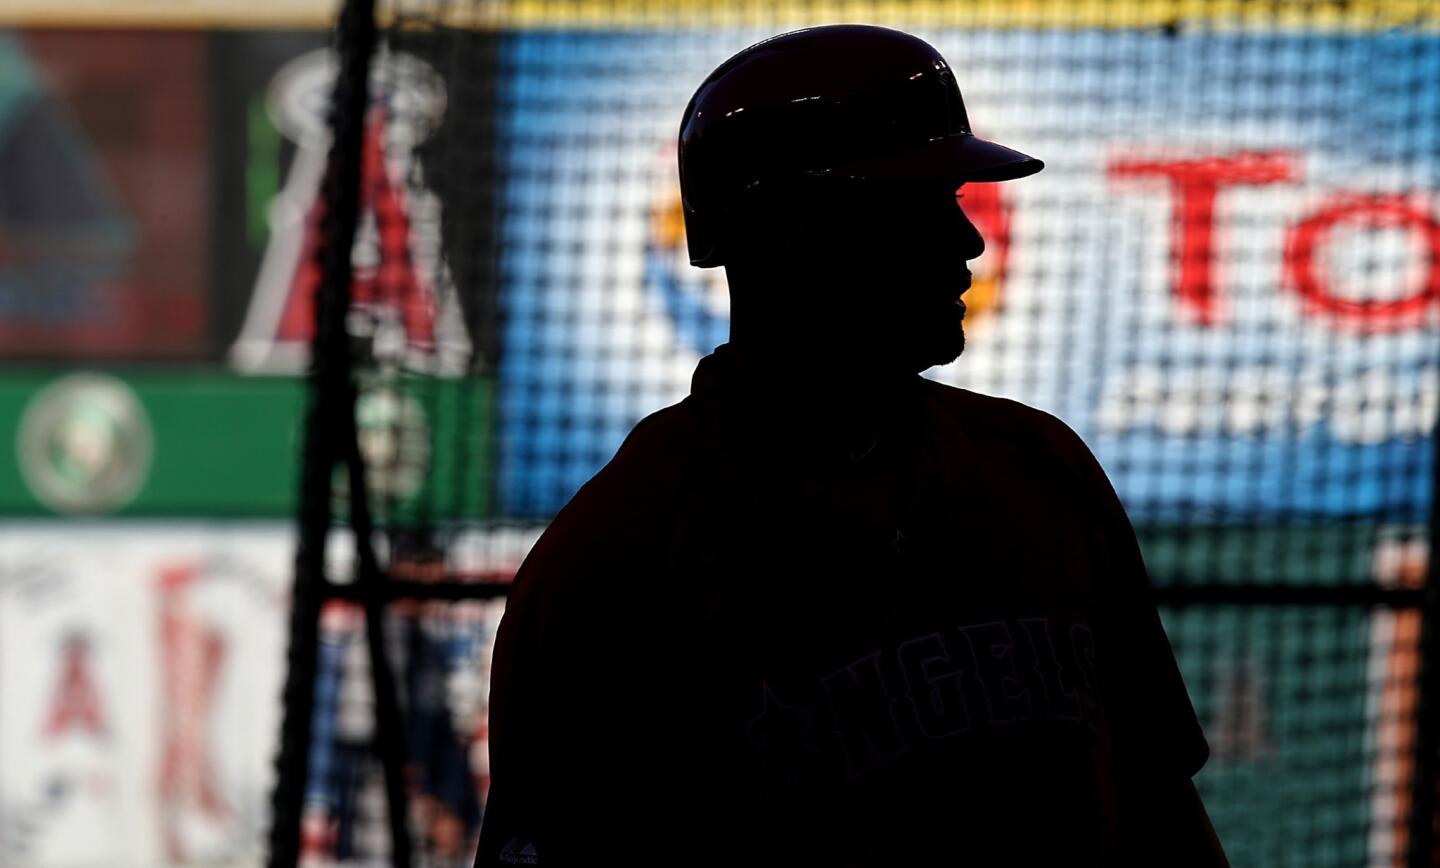 Angels first baseman Albert Pujols takes part in batting practice before the start of the team's 2014 season opener against the Seattle Mariners at Angel Stadium.